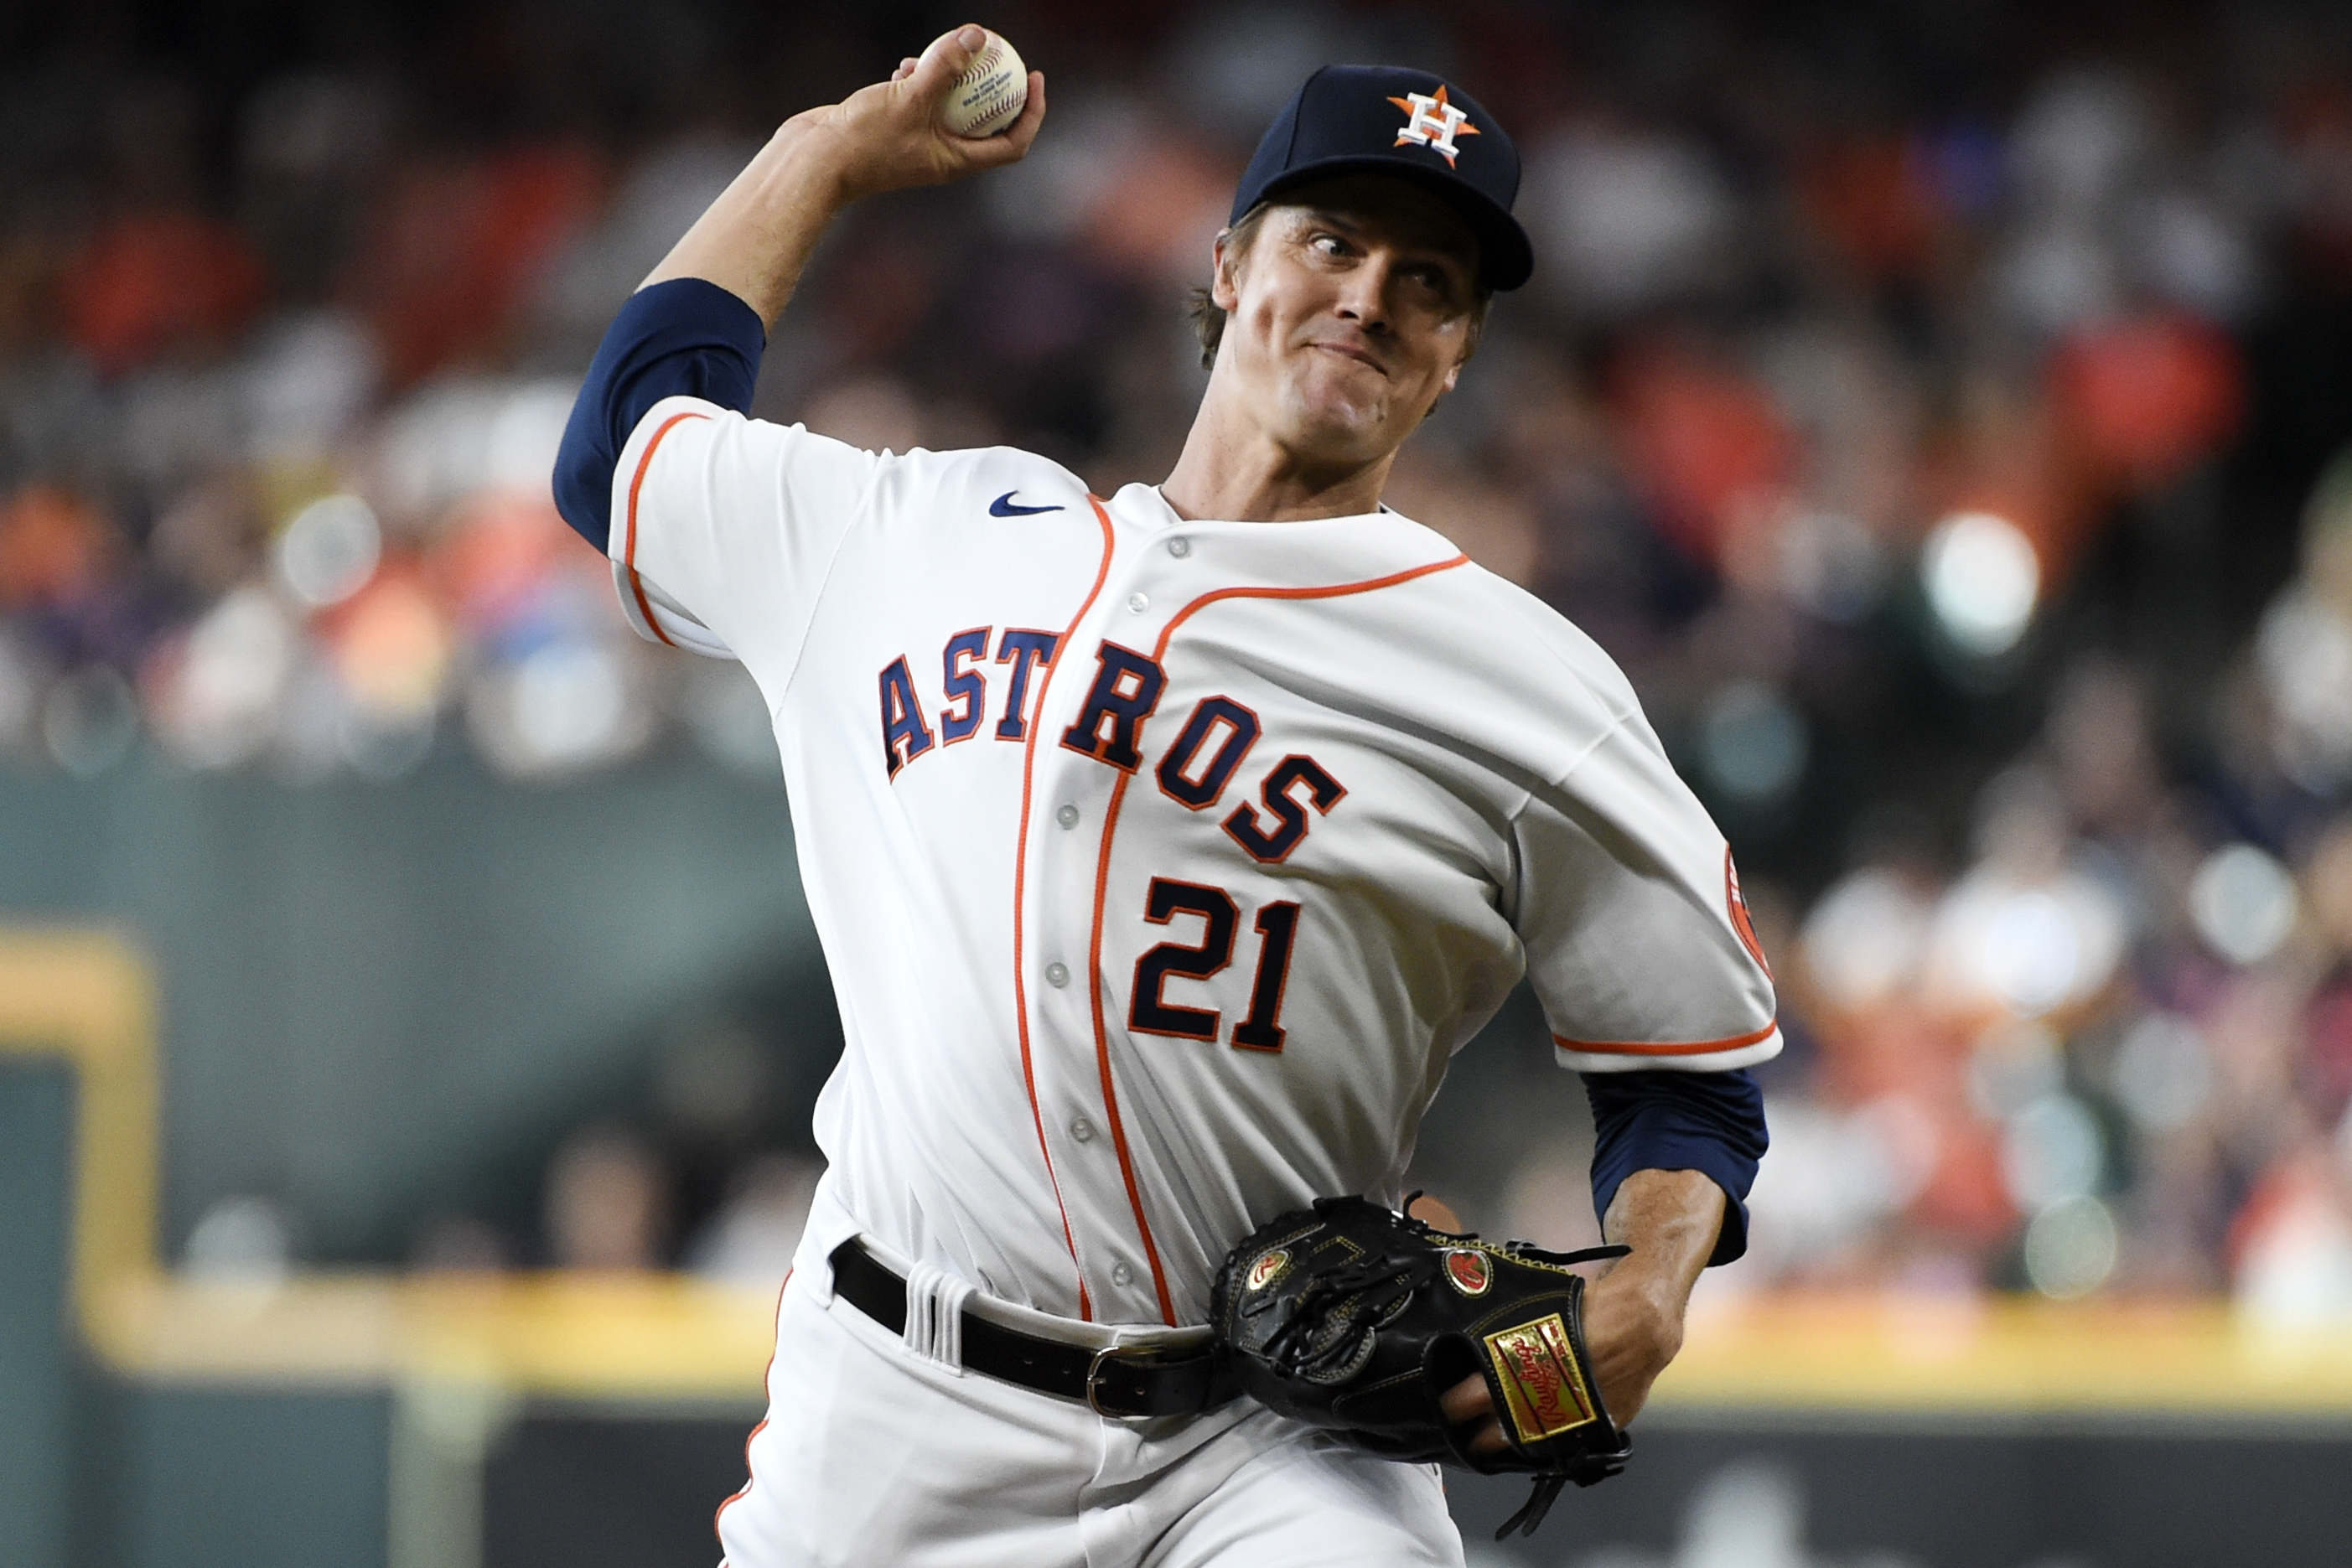 Houston Astros Ace Framber Valdez Says Jersey Color a 'Crutch' Going into  Game 6 - Sports Illustrated Inside The Astros